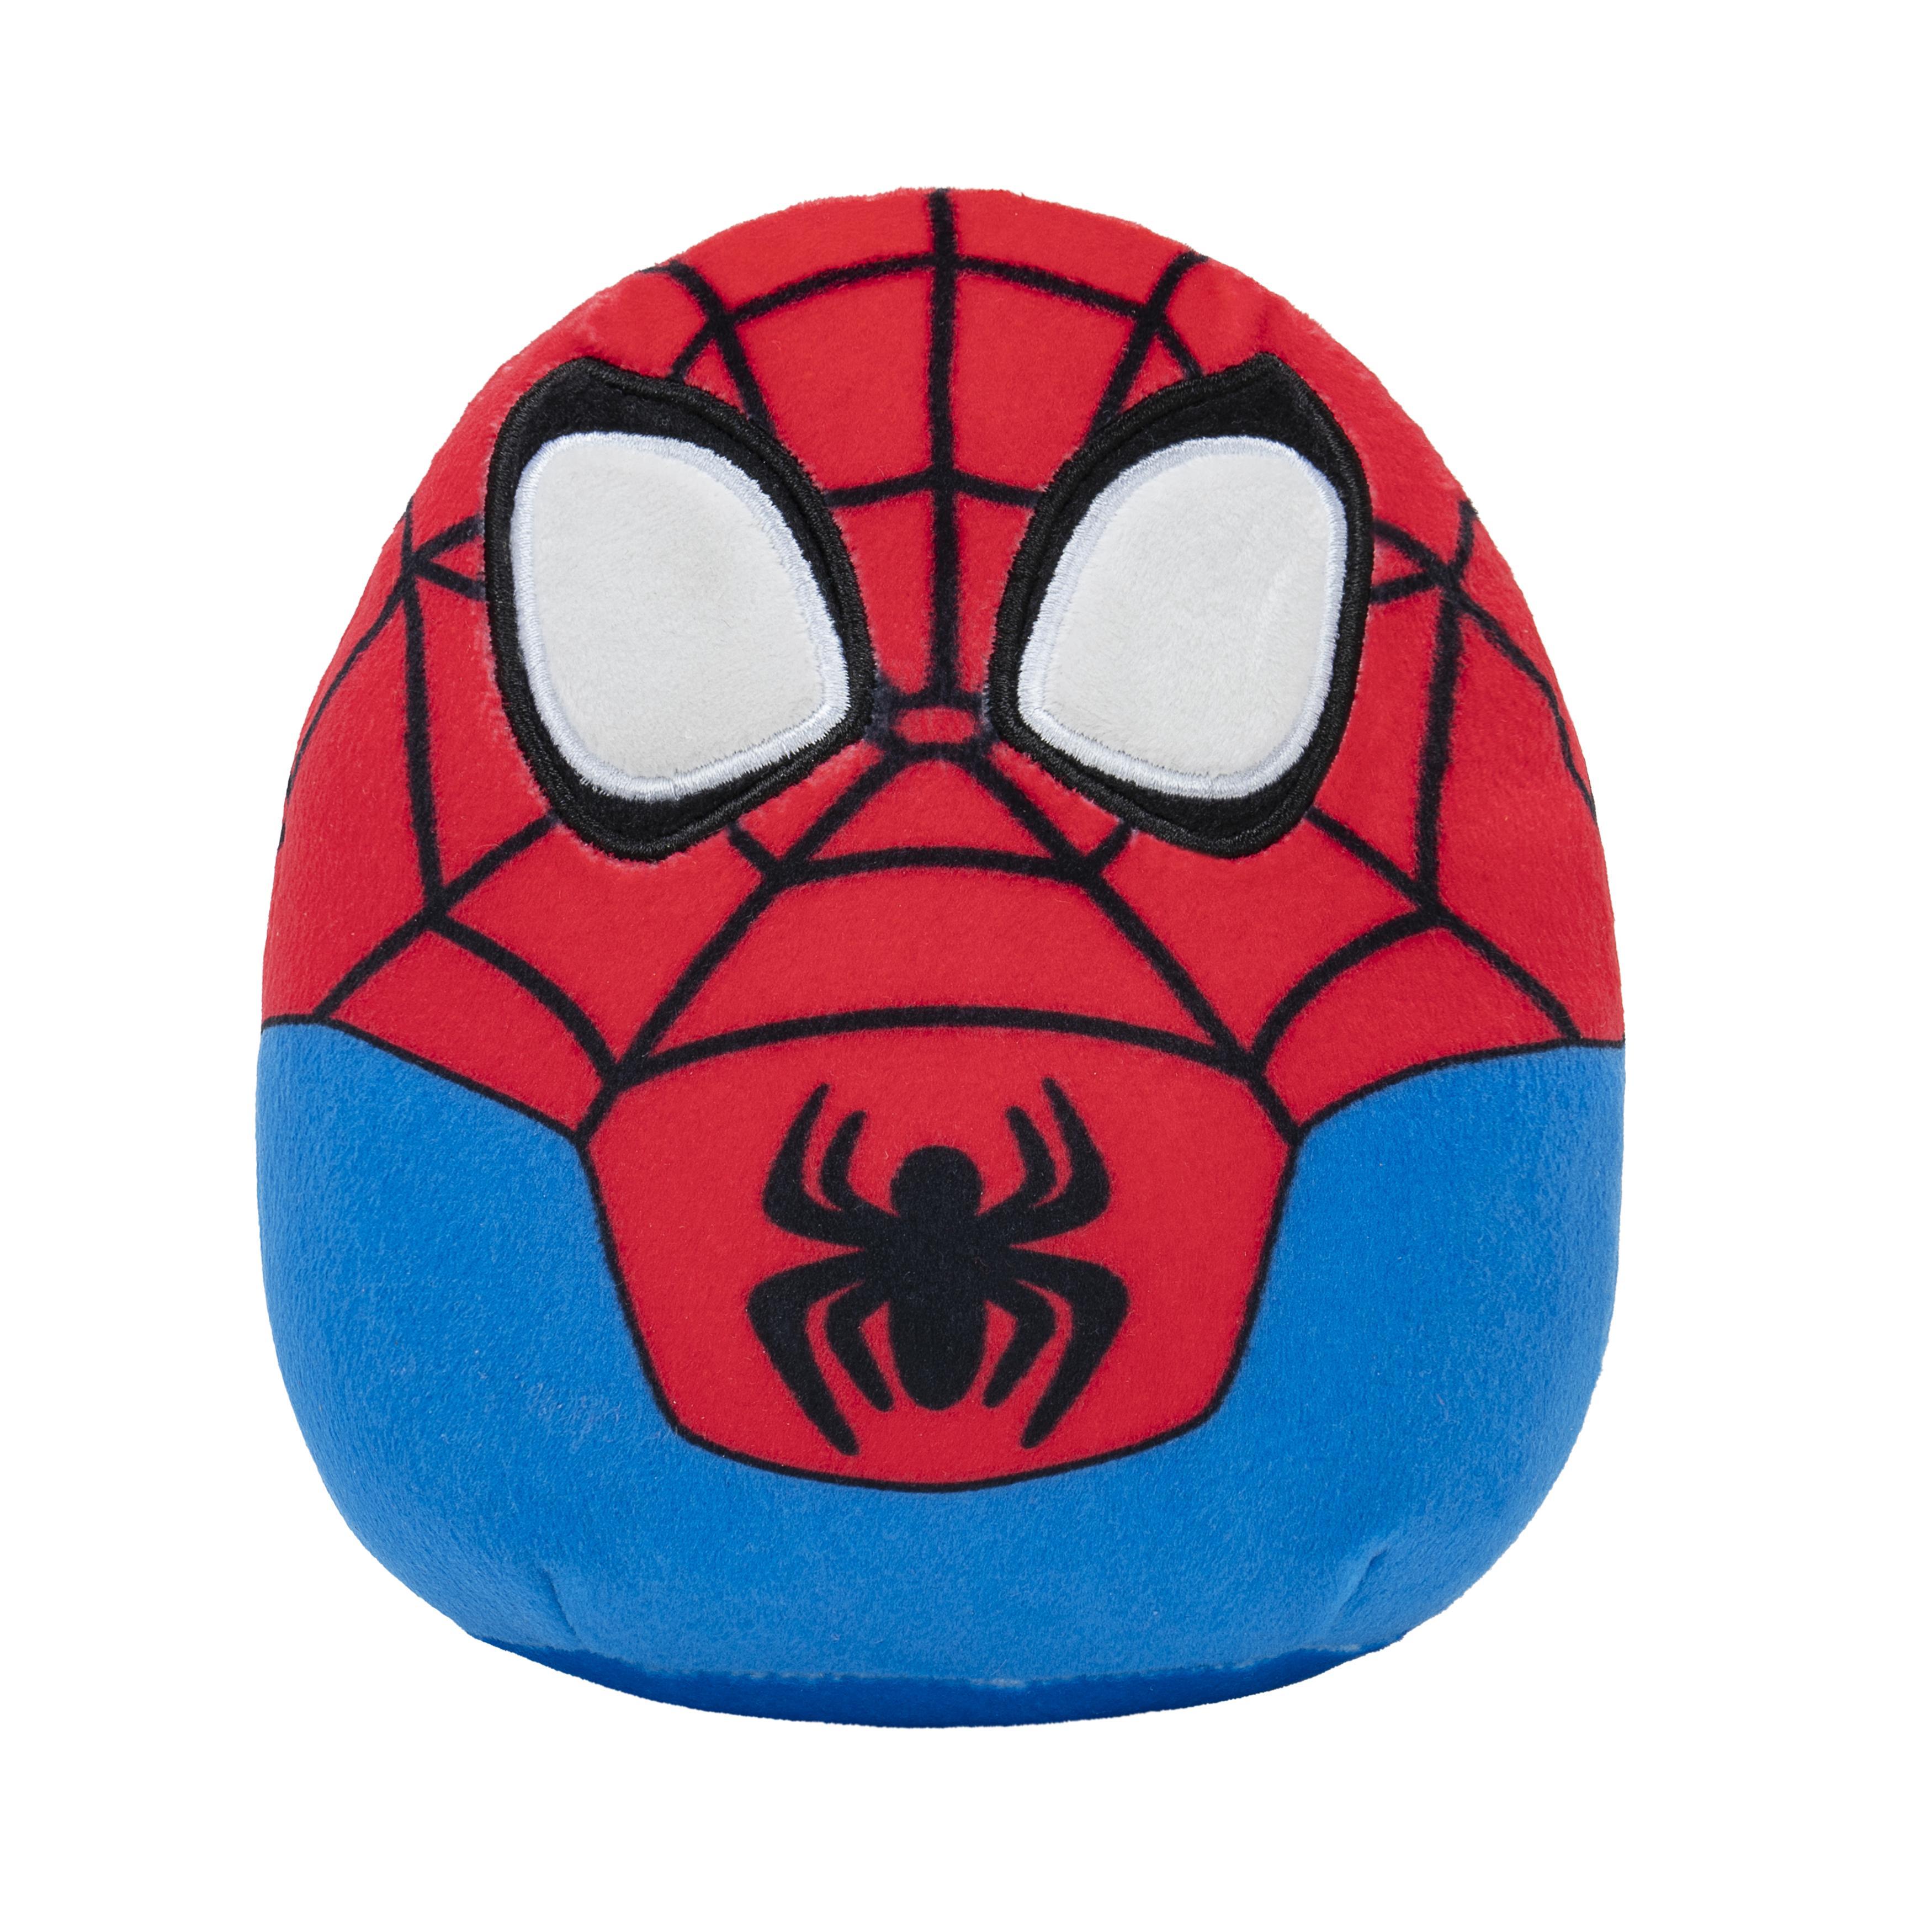 Squishmallows - 36 cm Plush - Spidey and His Amazing Friends - Spidey (1880881)